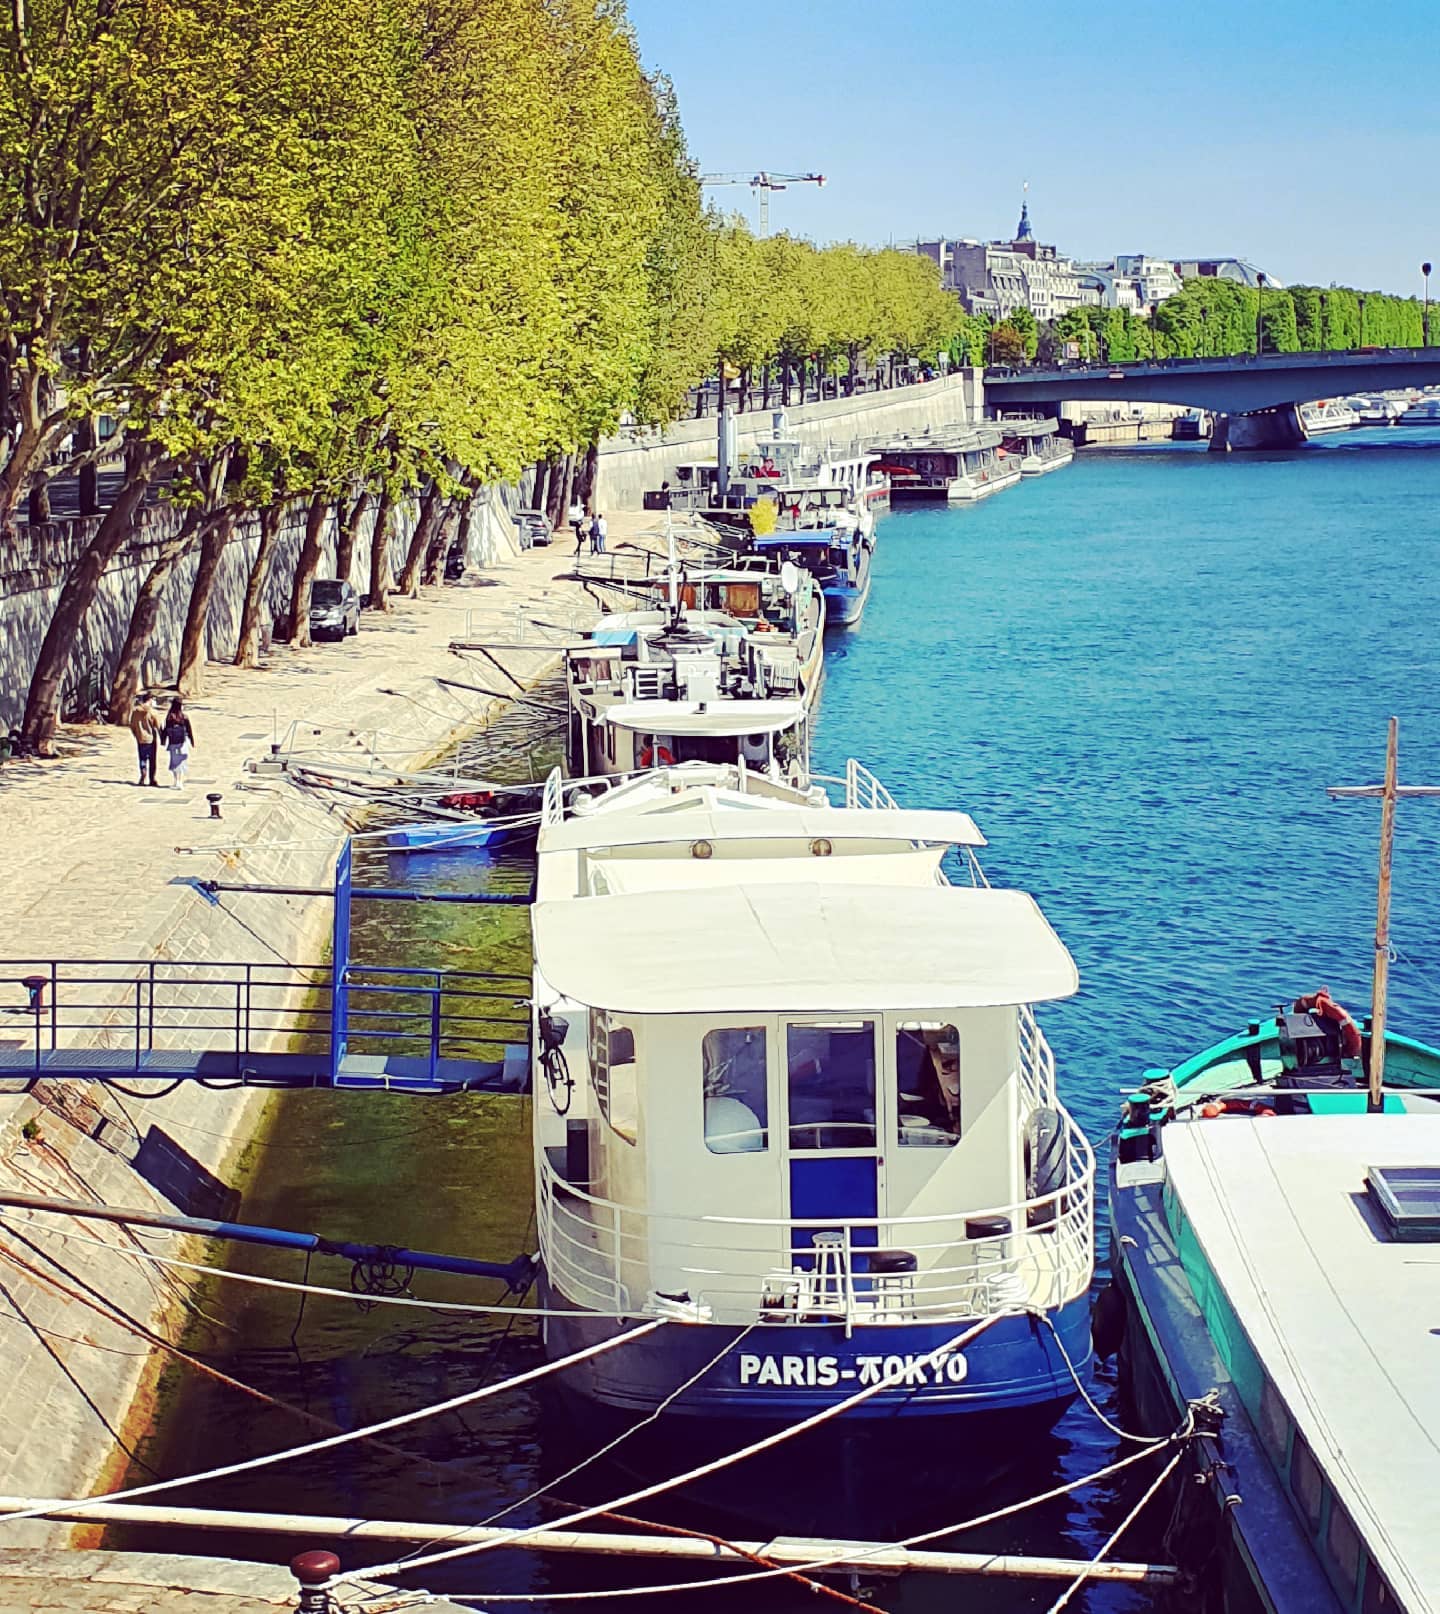 Rediscovering Paris and links to life in Tokyo, more in a new blog post. Even the random messages around (see the boat name?) show that Paris and Tokyo are not that far apart after all... 😉
.
.
.
.
.
#paristokyo #paris #fromparistotokyo #withlove #sunnyday #enjoy #walkinparis #newblogpost #rediscoveringparis #chilling #outdoors #weekendvibes #lavieestbelle #lifeisgood #newbeginnings #パリ